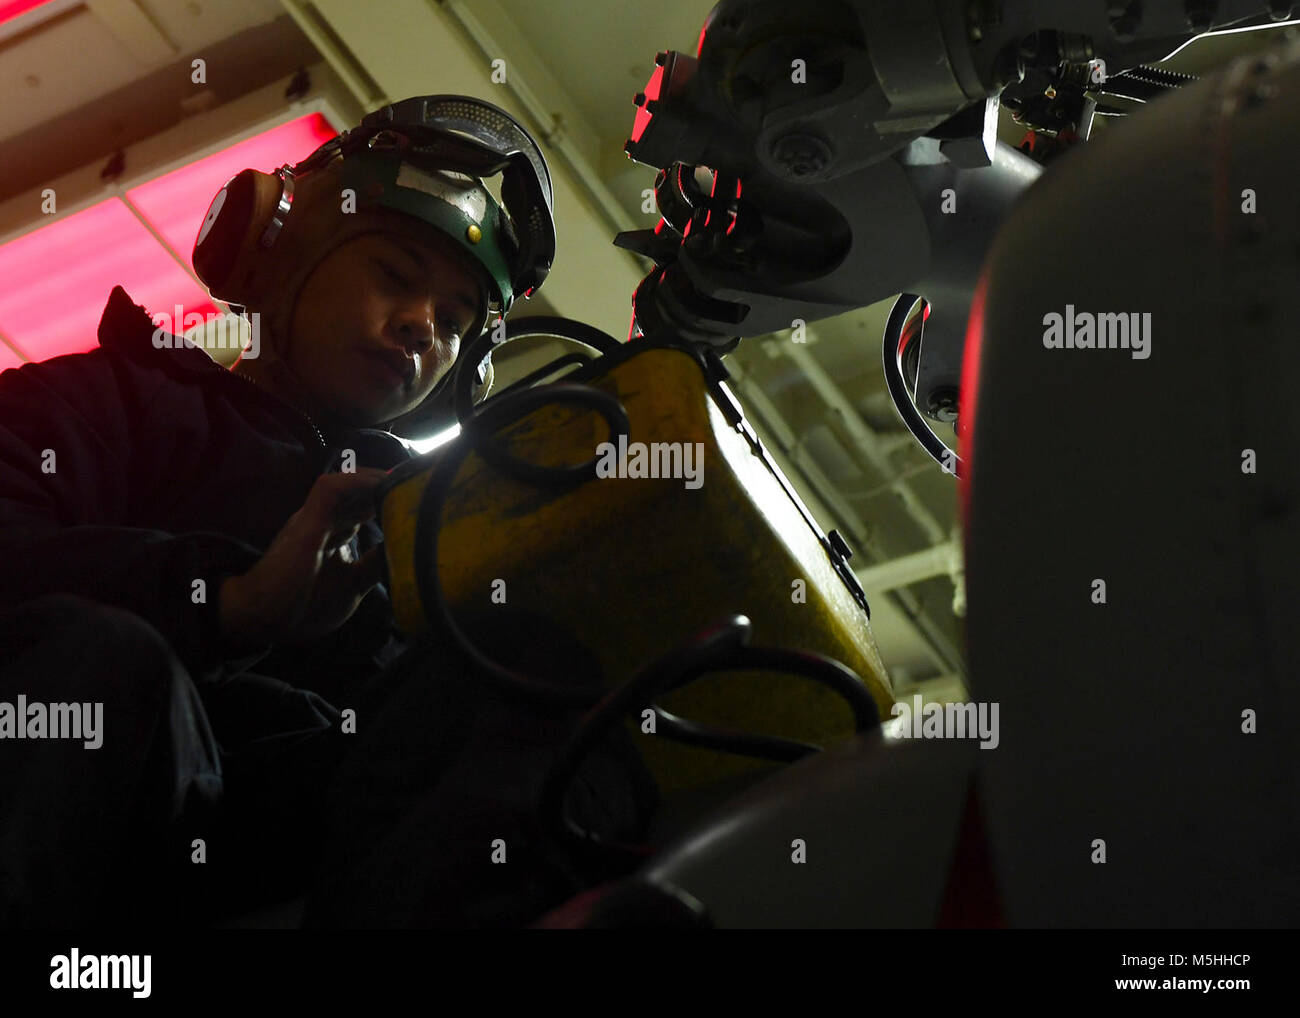 PACIFIC OCEAN (Feb. 12, 2018) Aviation Structural Mechanic 2nd Class Benjamin Mones, from San Diego, conducts maintenance on an MH-60R Sea Hawk, assigned to the “Scorpions” of Helicopter Maritime Strike Squadron (HSM) 49, aboard the Arleigh Burke-class guided-missile destroyer USS Sterett (DDG 104). Sterett is on a scheduled deployment to conduct operations in the Indo-Pacific region. It will also support the Wasp Expeditionary Strike Group (ESG) in order to advance U.S. Pacific Fleet’s Up-Gunned ESG concept and will train with forward-deployed amphibious ships across all mission areas. (U.S.  Stock Photo